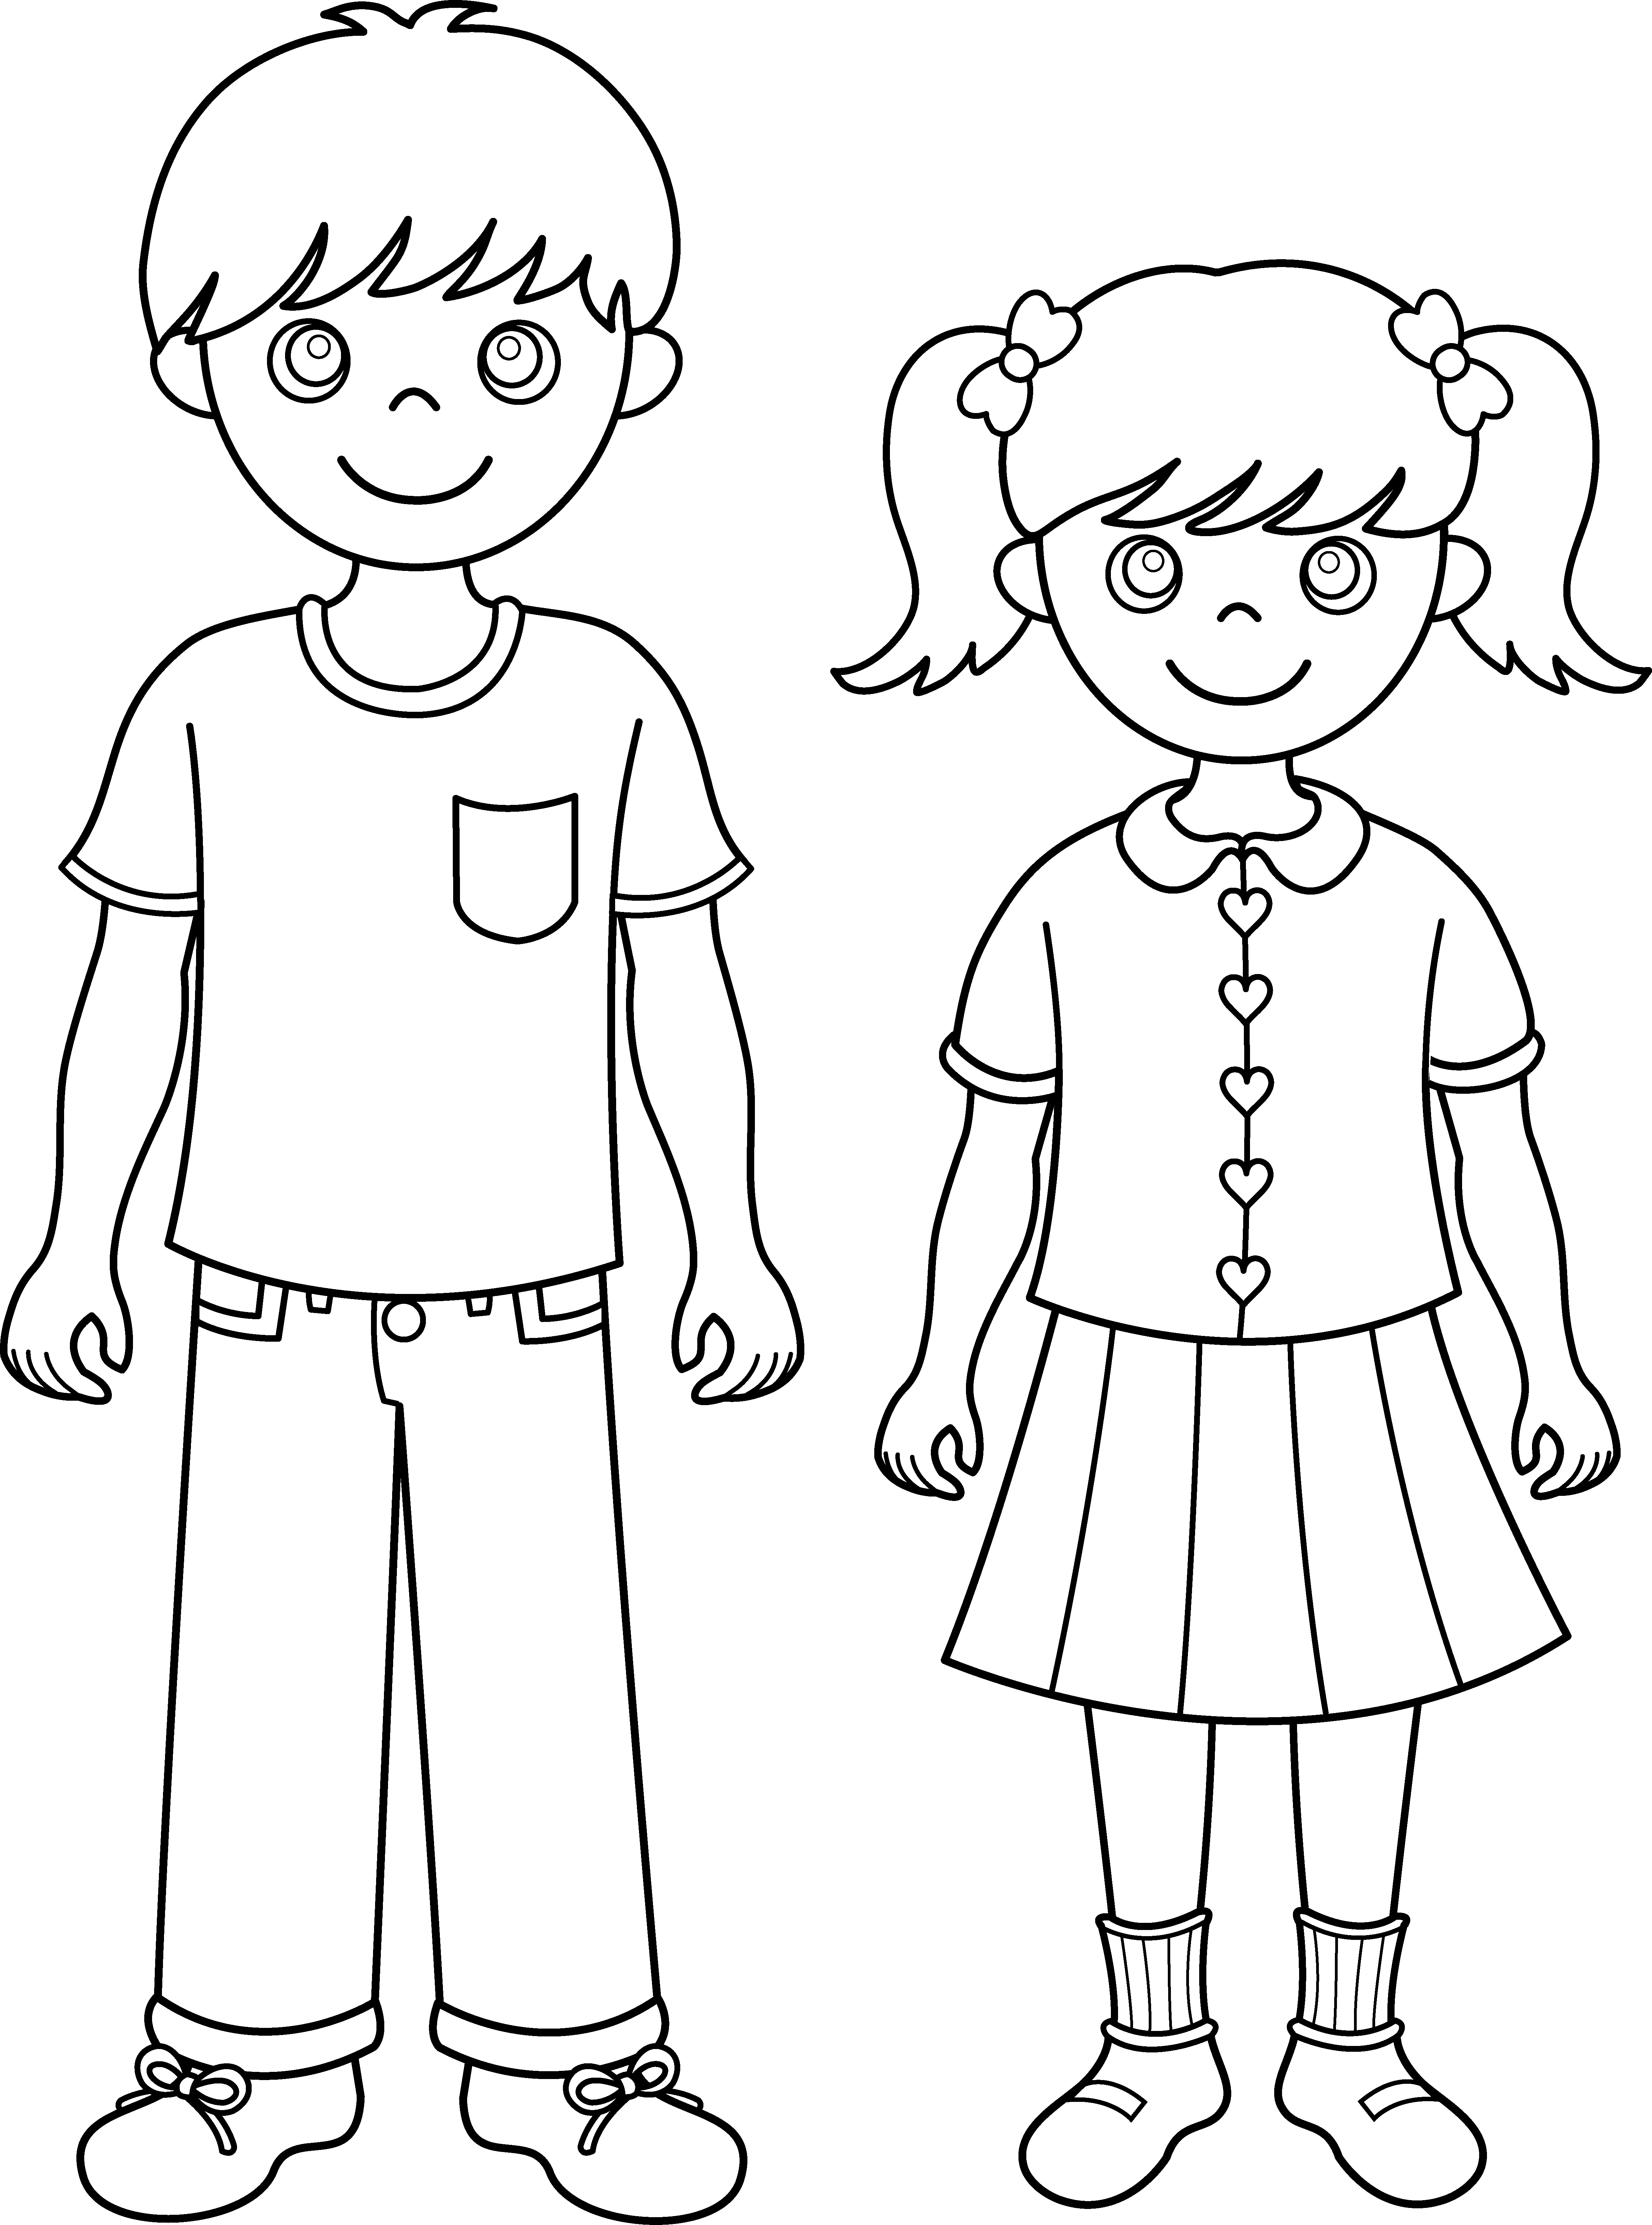 Siblings clipart black and white 